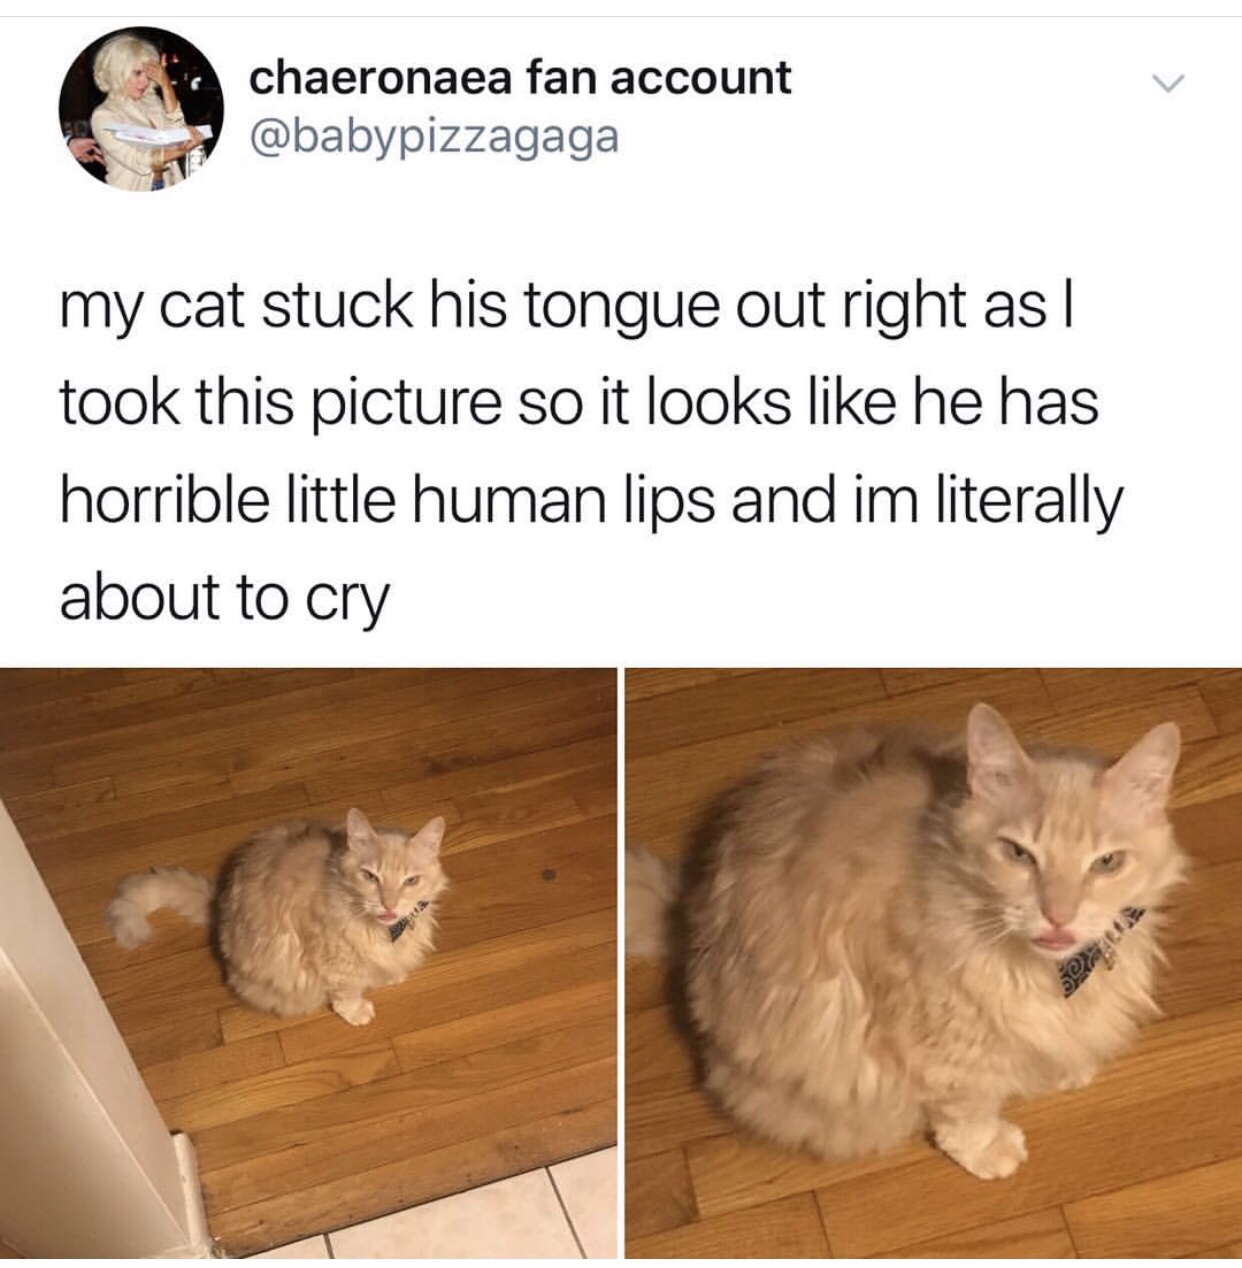 savage tweets - catto memes - chaeronaea fan account my cat stuck his tongue out right as I took this picture so it looks he has horrible little human lips and im literally about to cry Sour